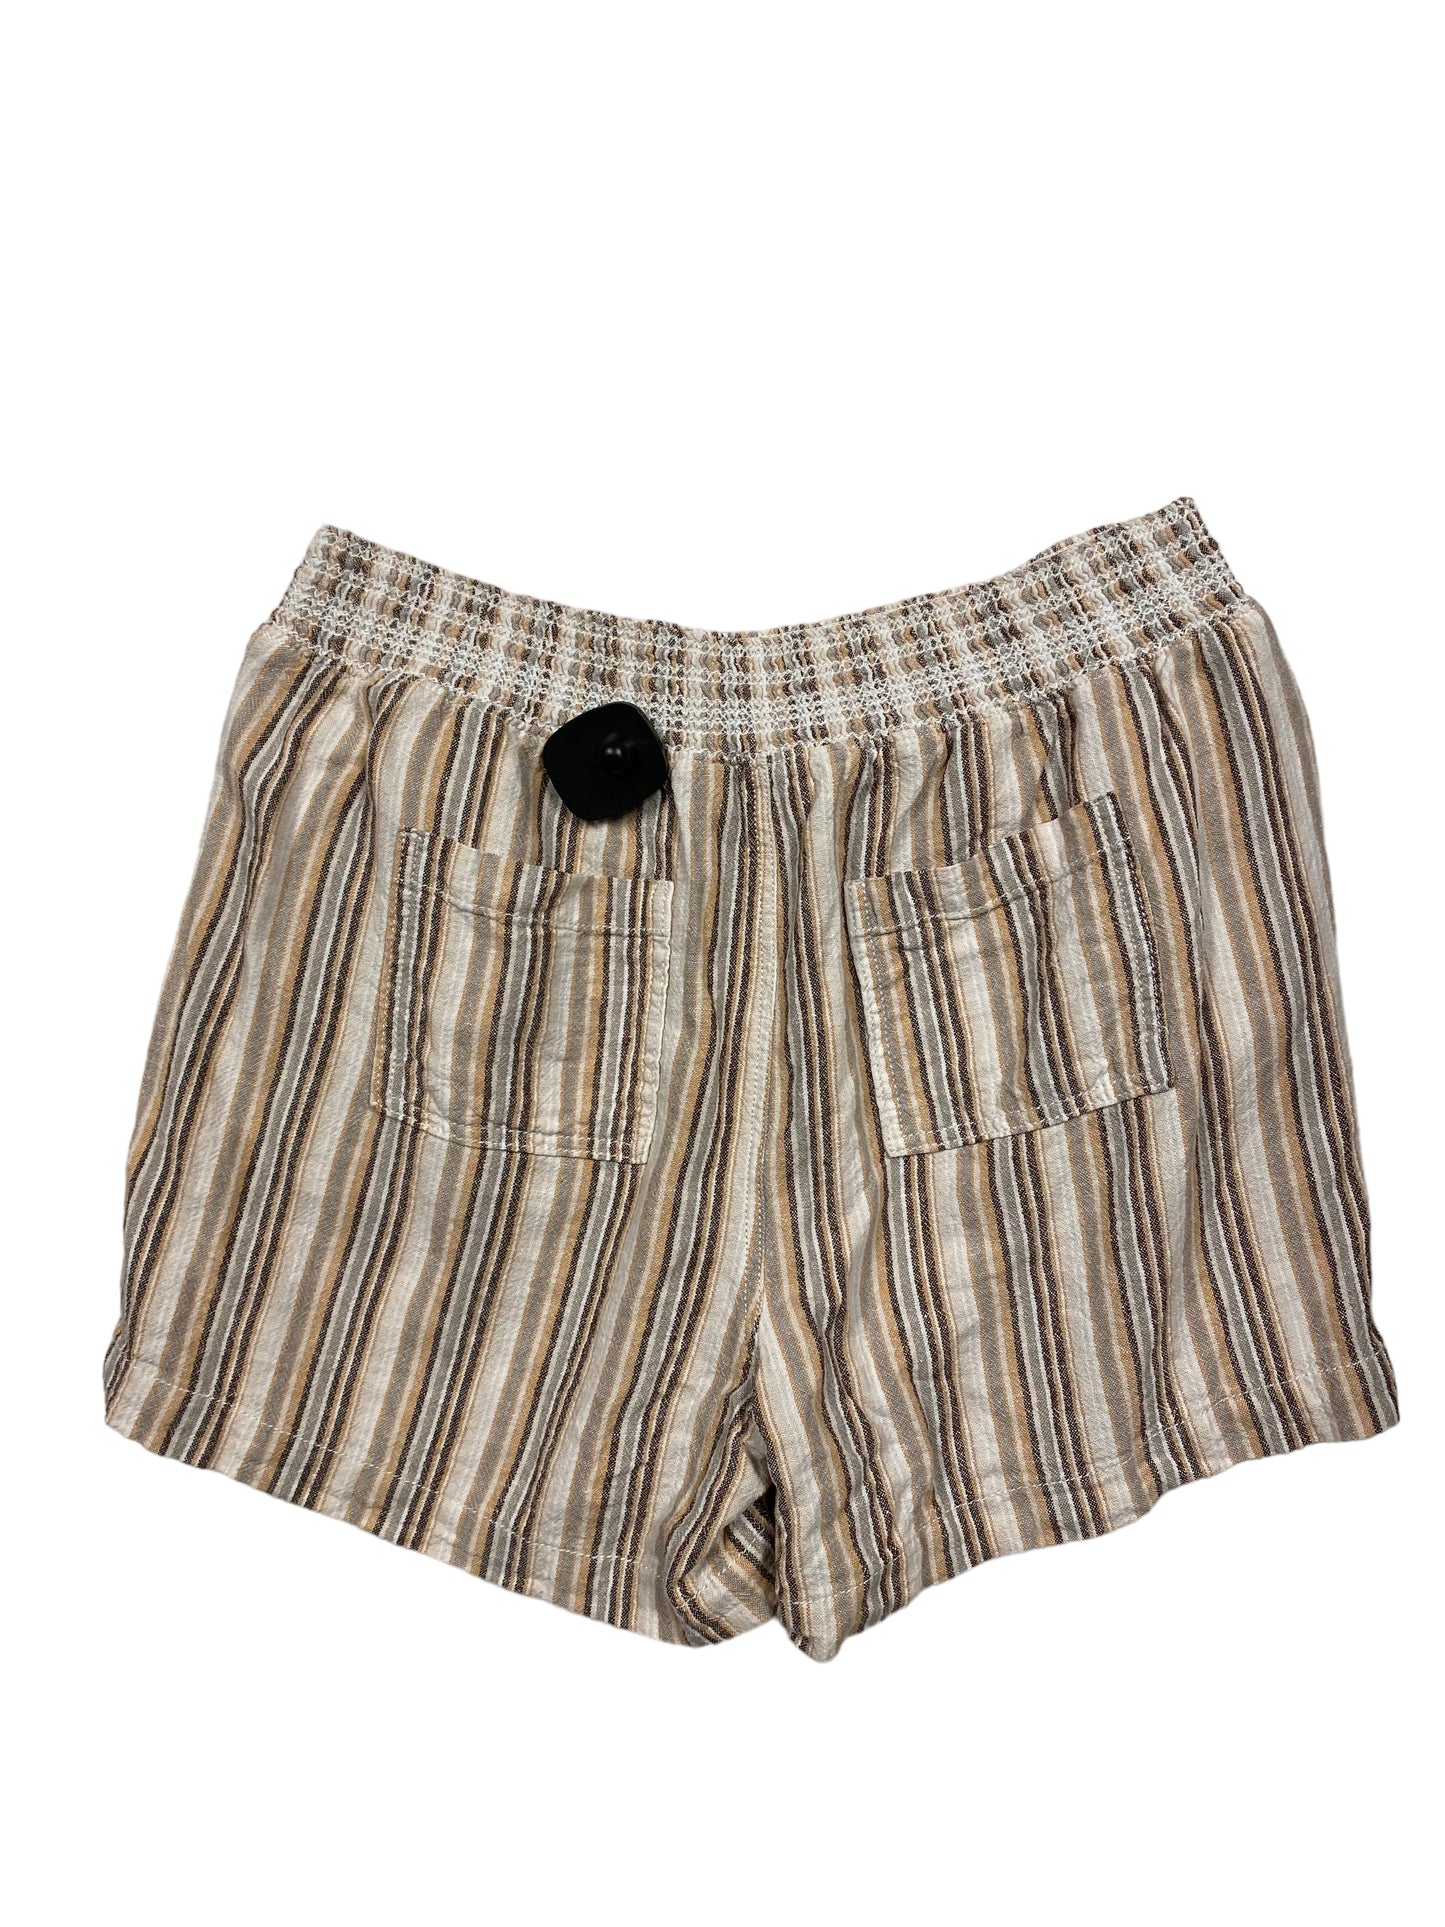 Shorts By Briggs  Size: L